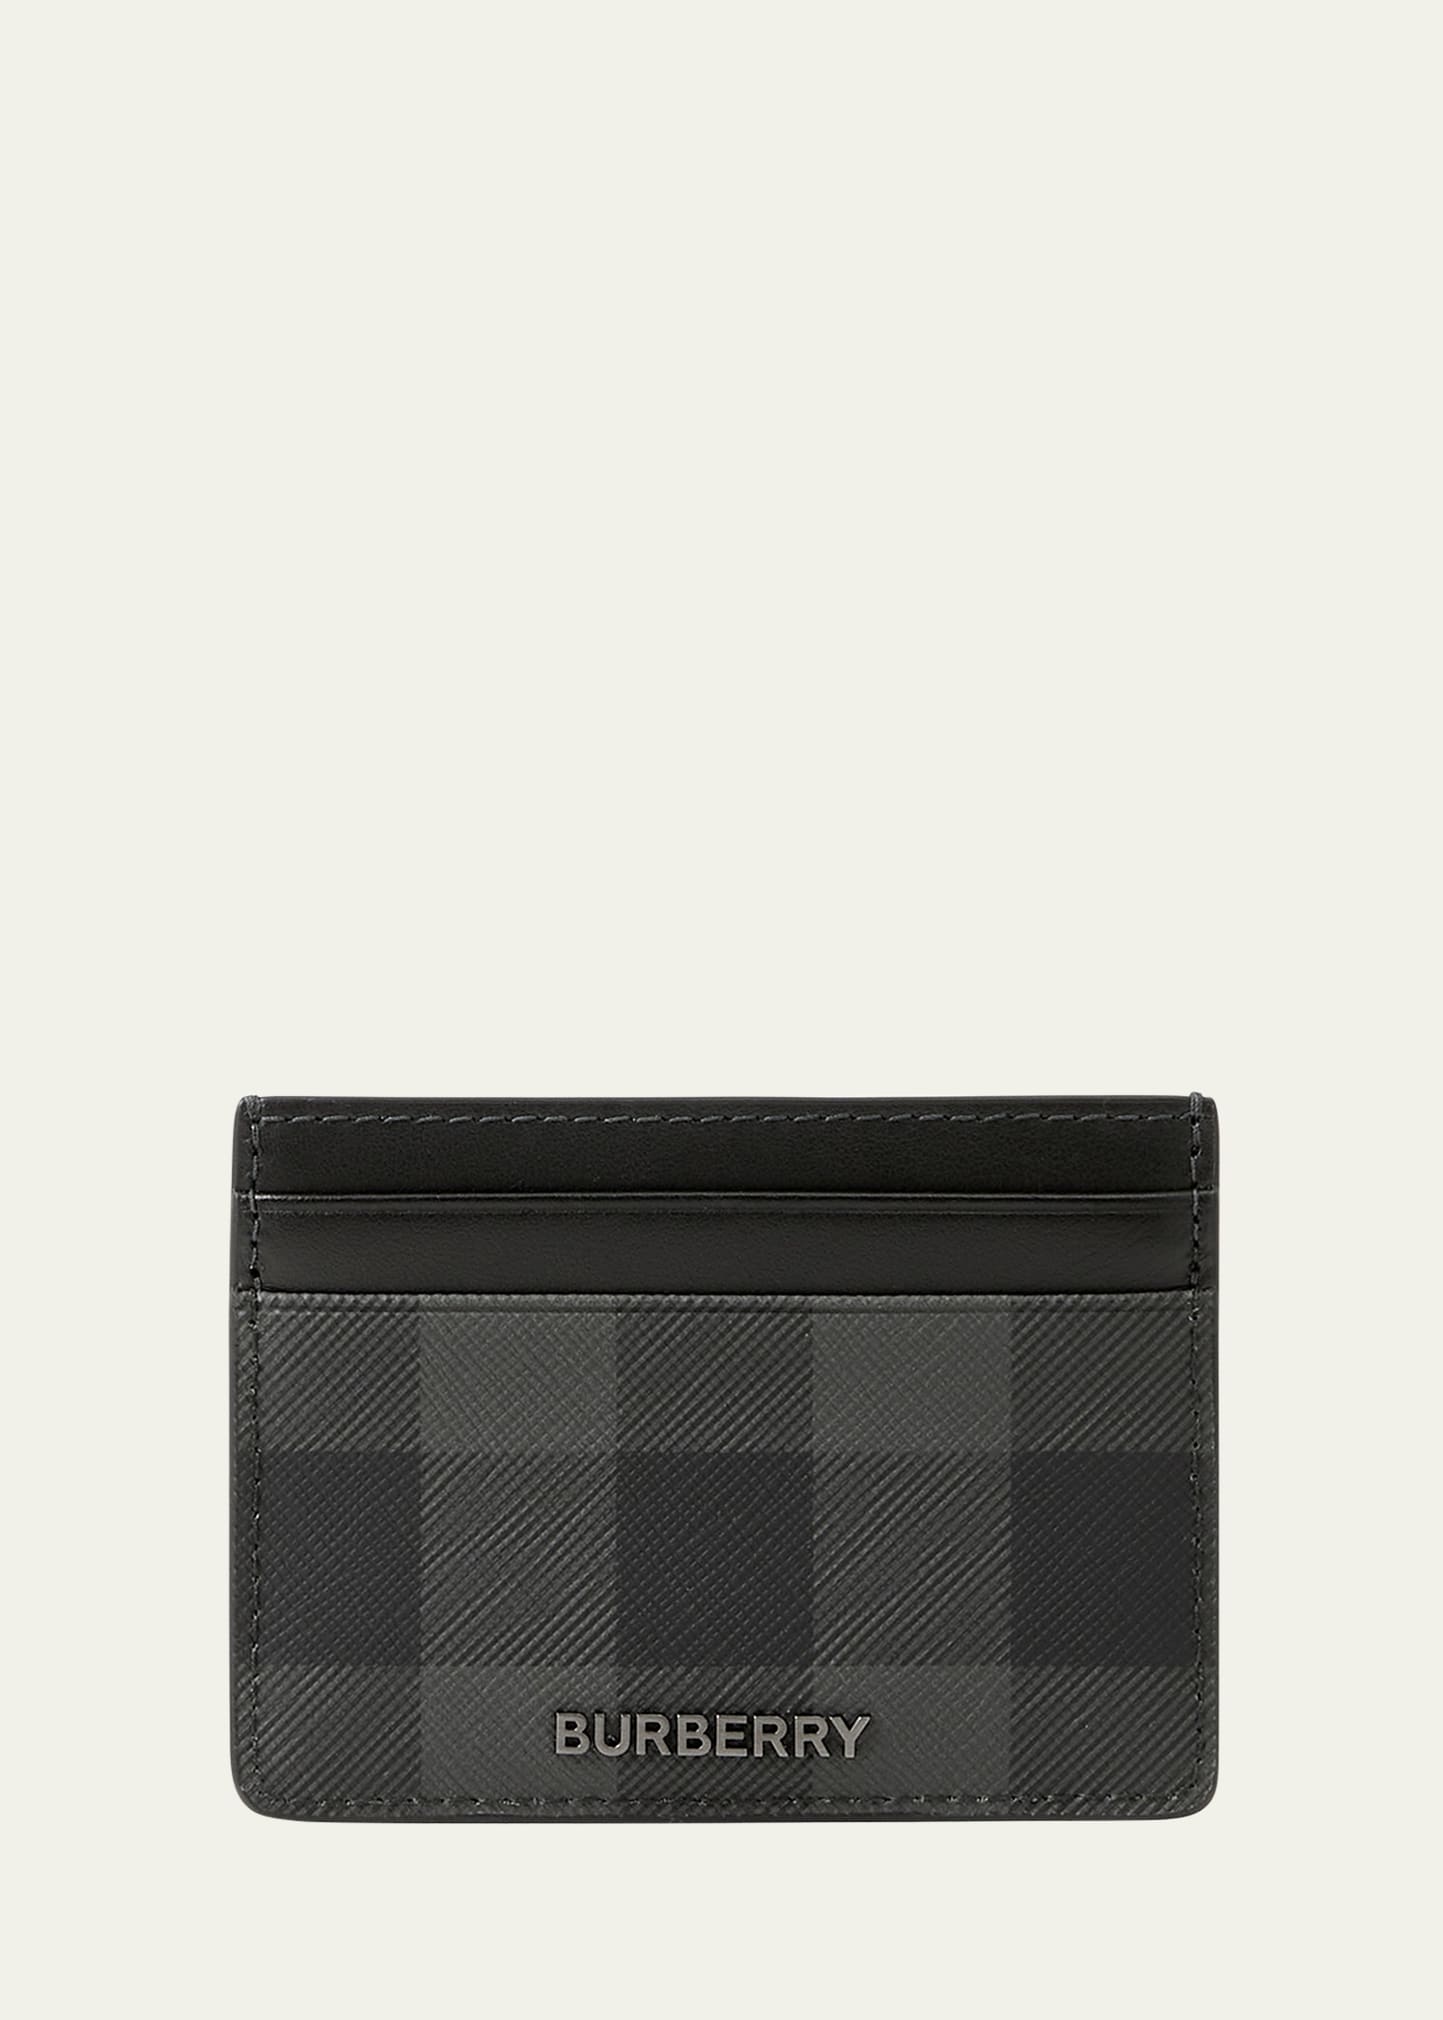 Burberry Men's Chase Card Case with Money Clip